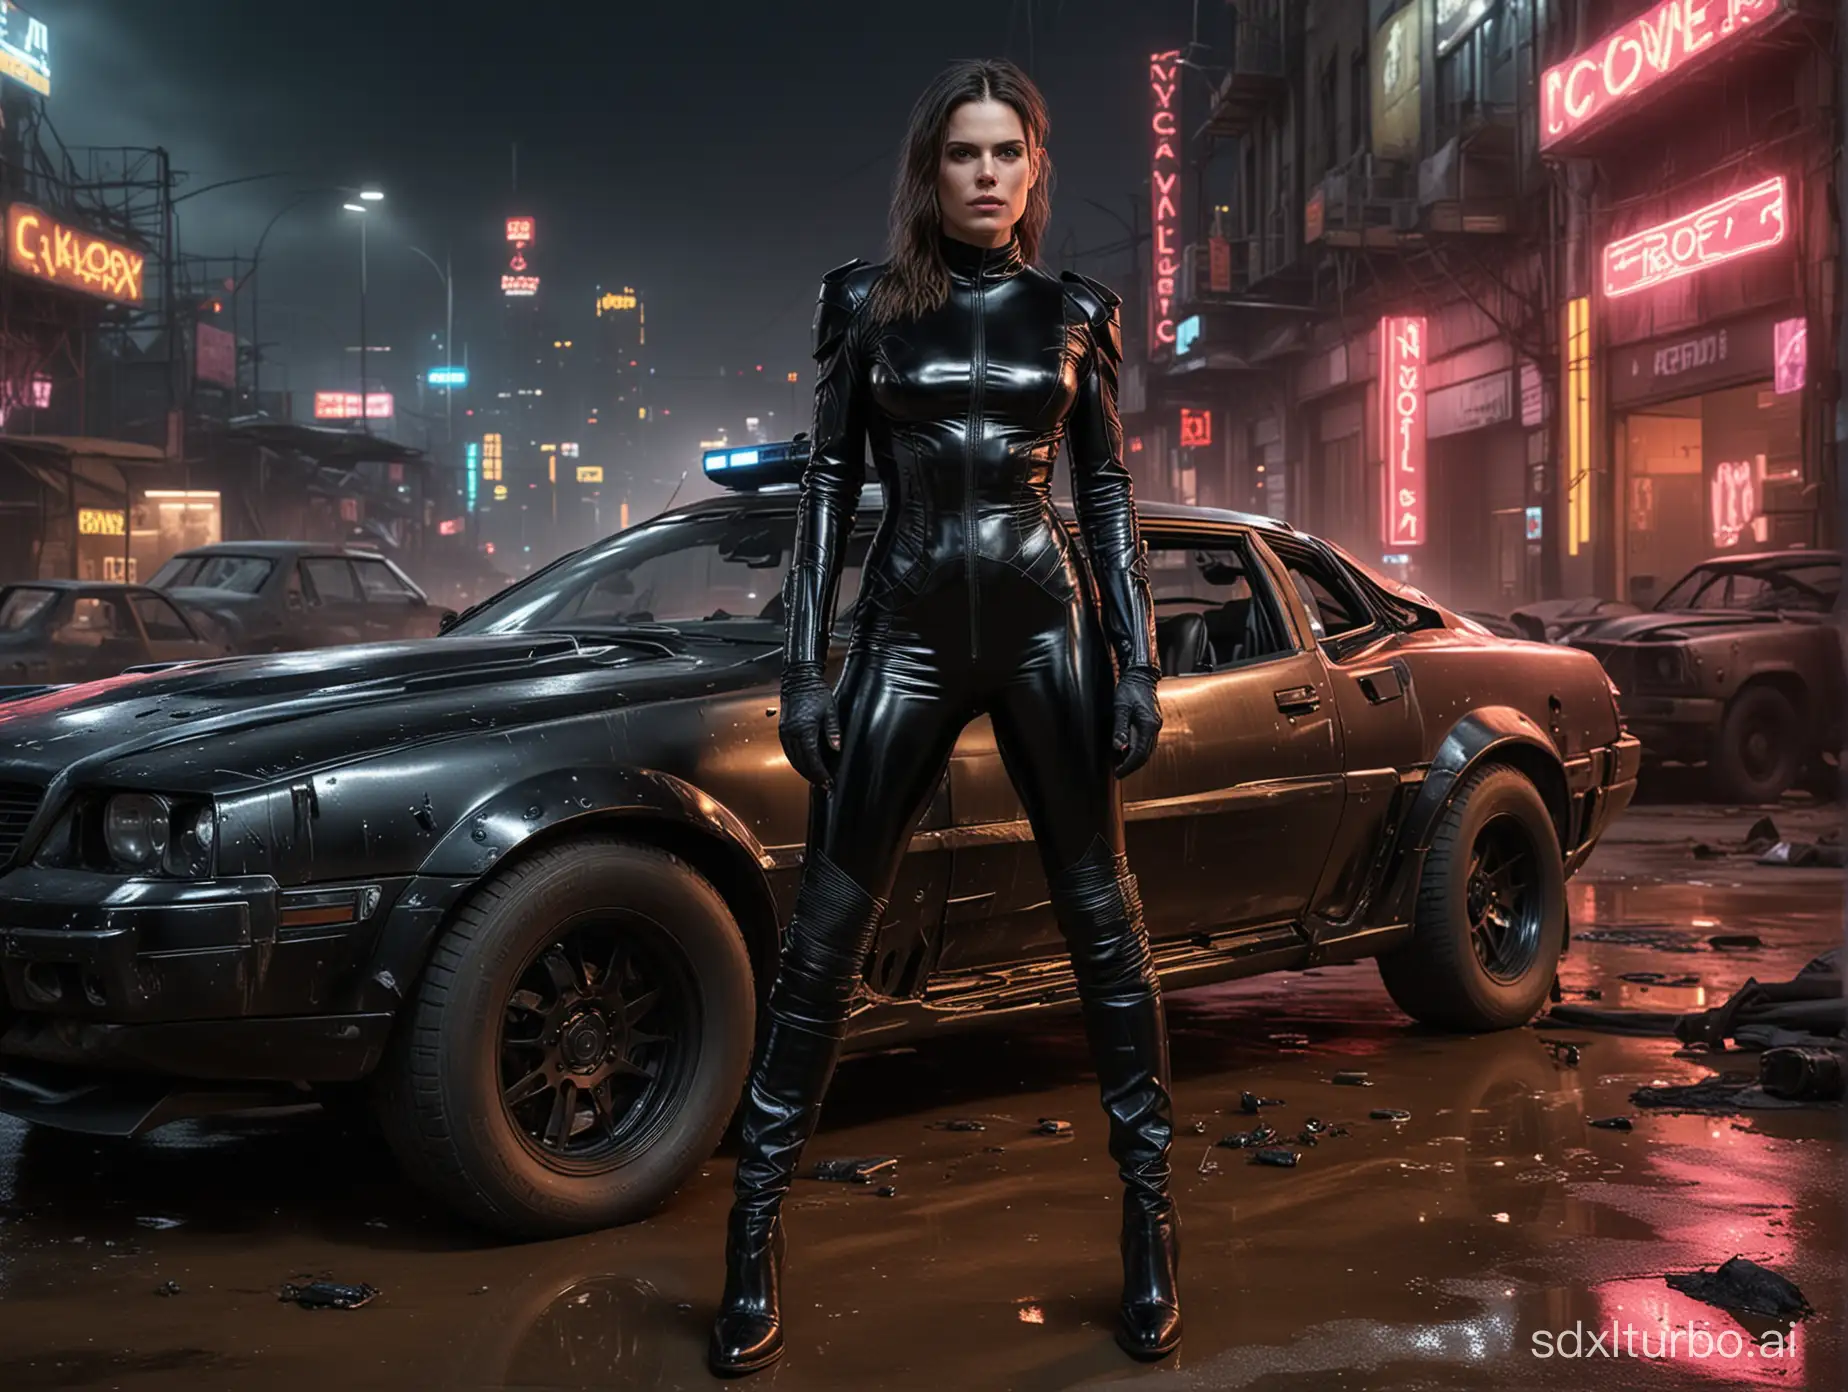 Cyberpunk-Police-Clea-Duvall-in-Shiny-PVC-Catsuit-Amid-NeonLit-Ruins